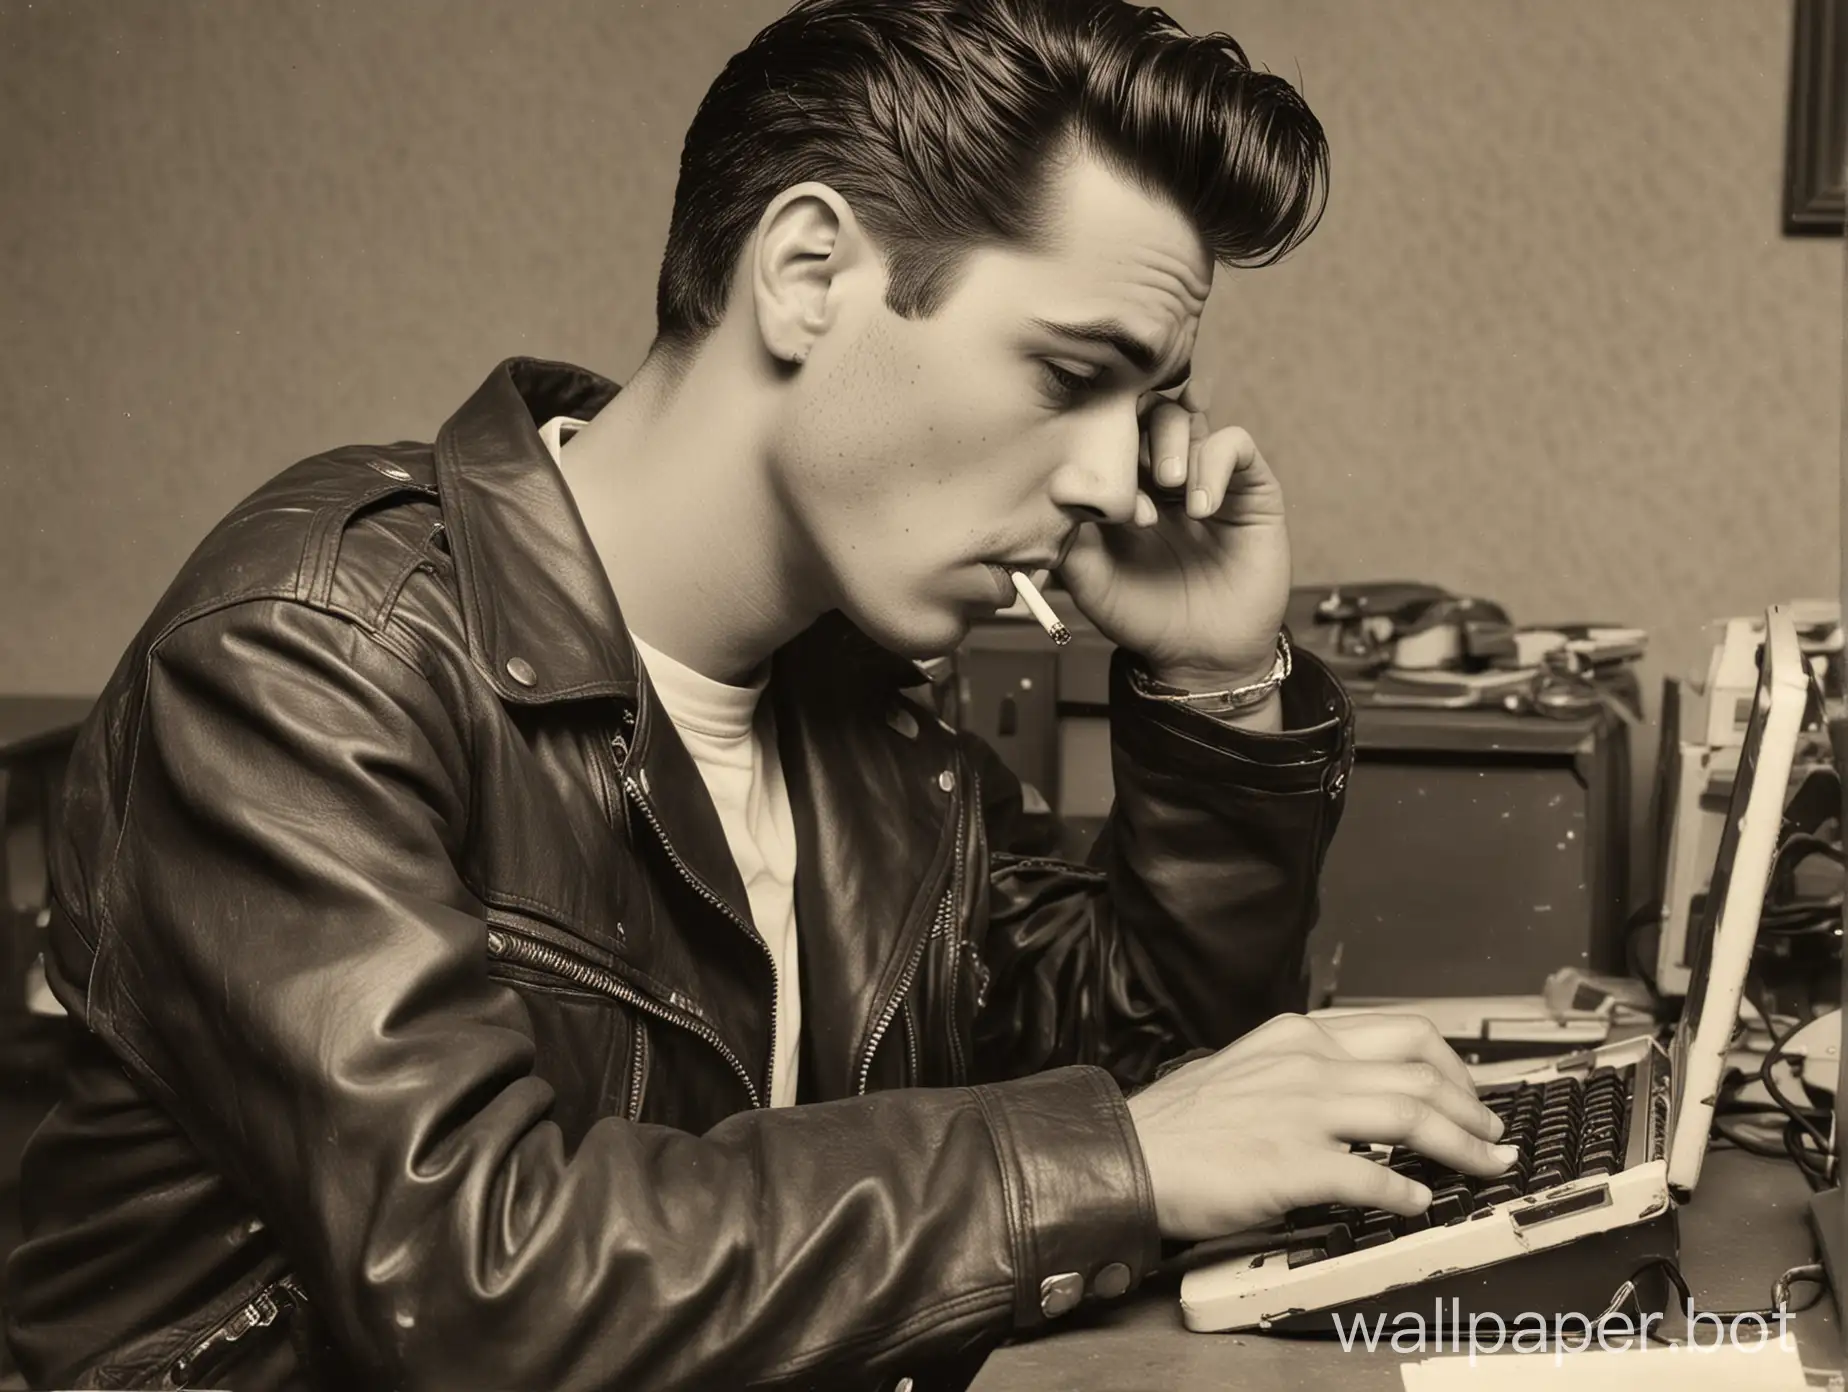 Retro-Greaser-Working-on-Computer-with-Cigarette